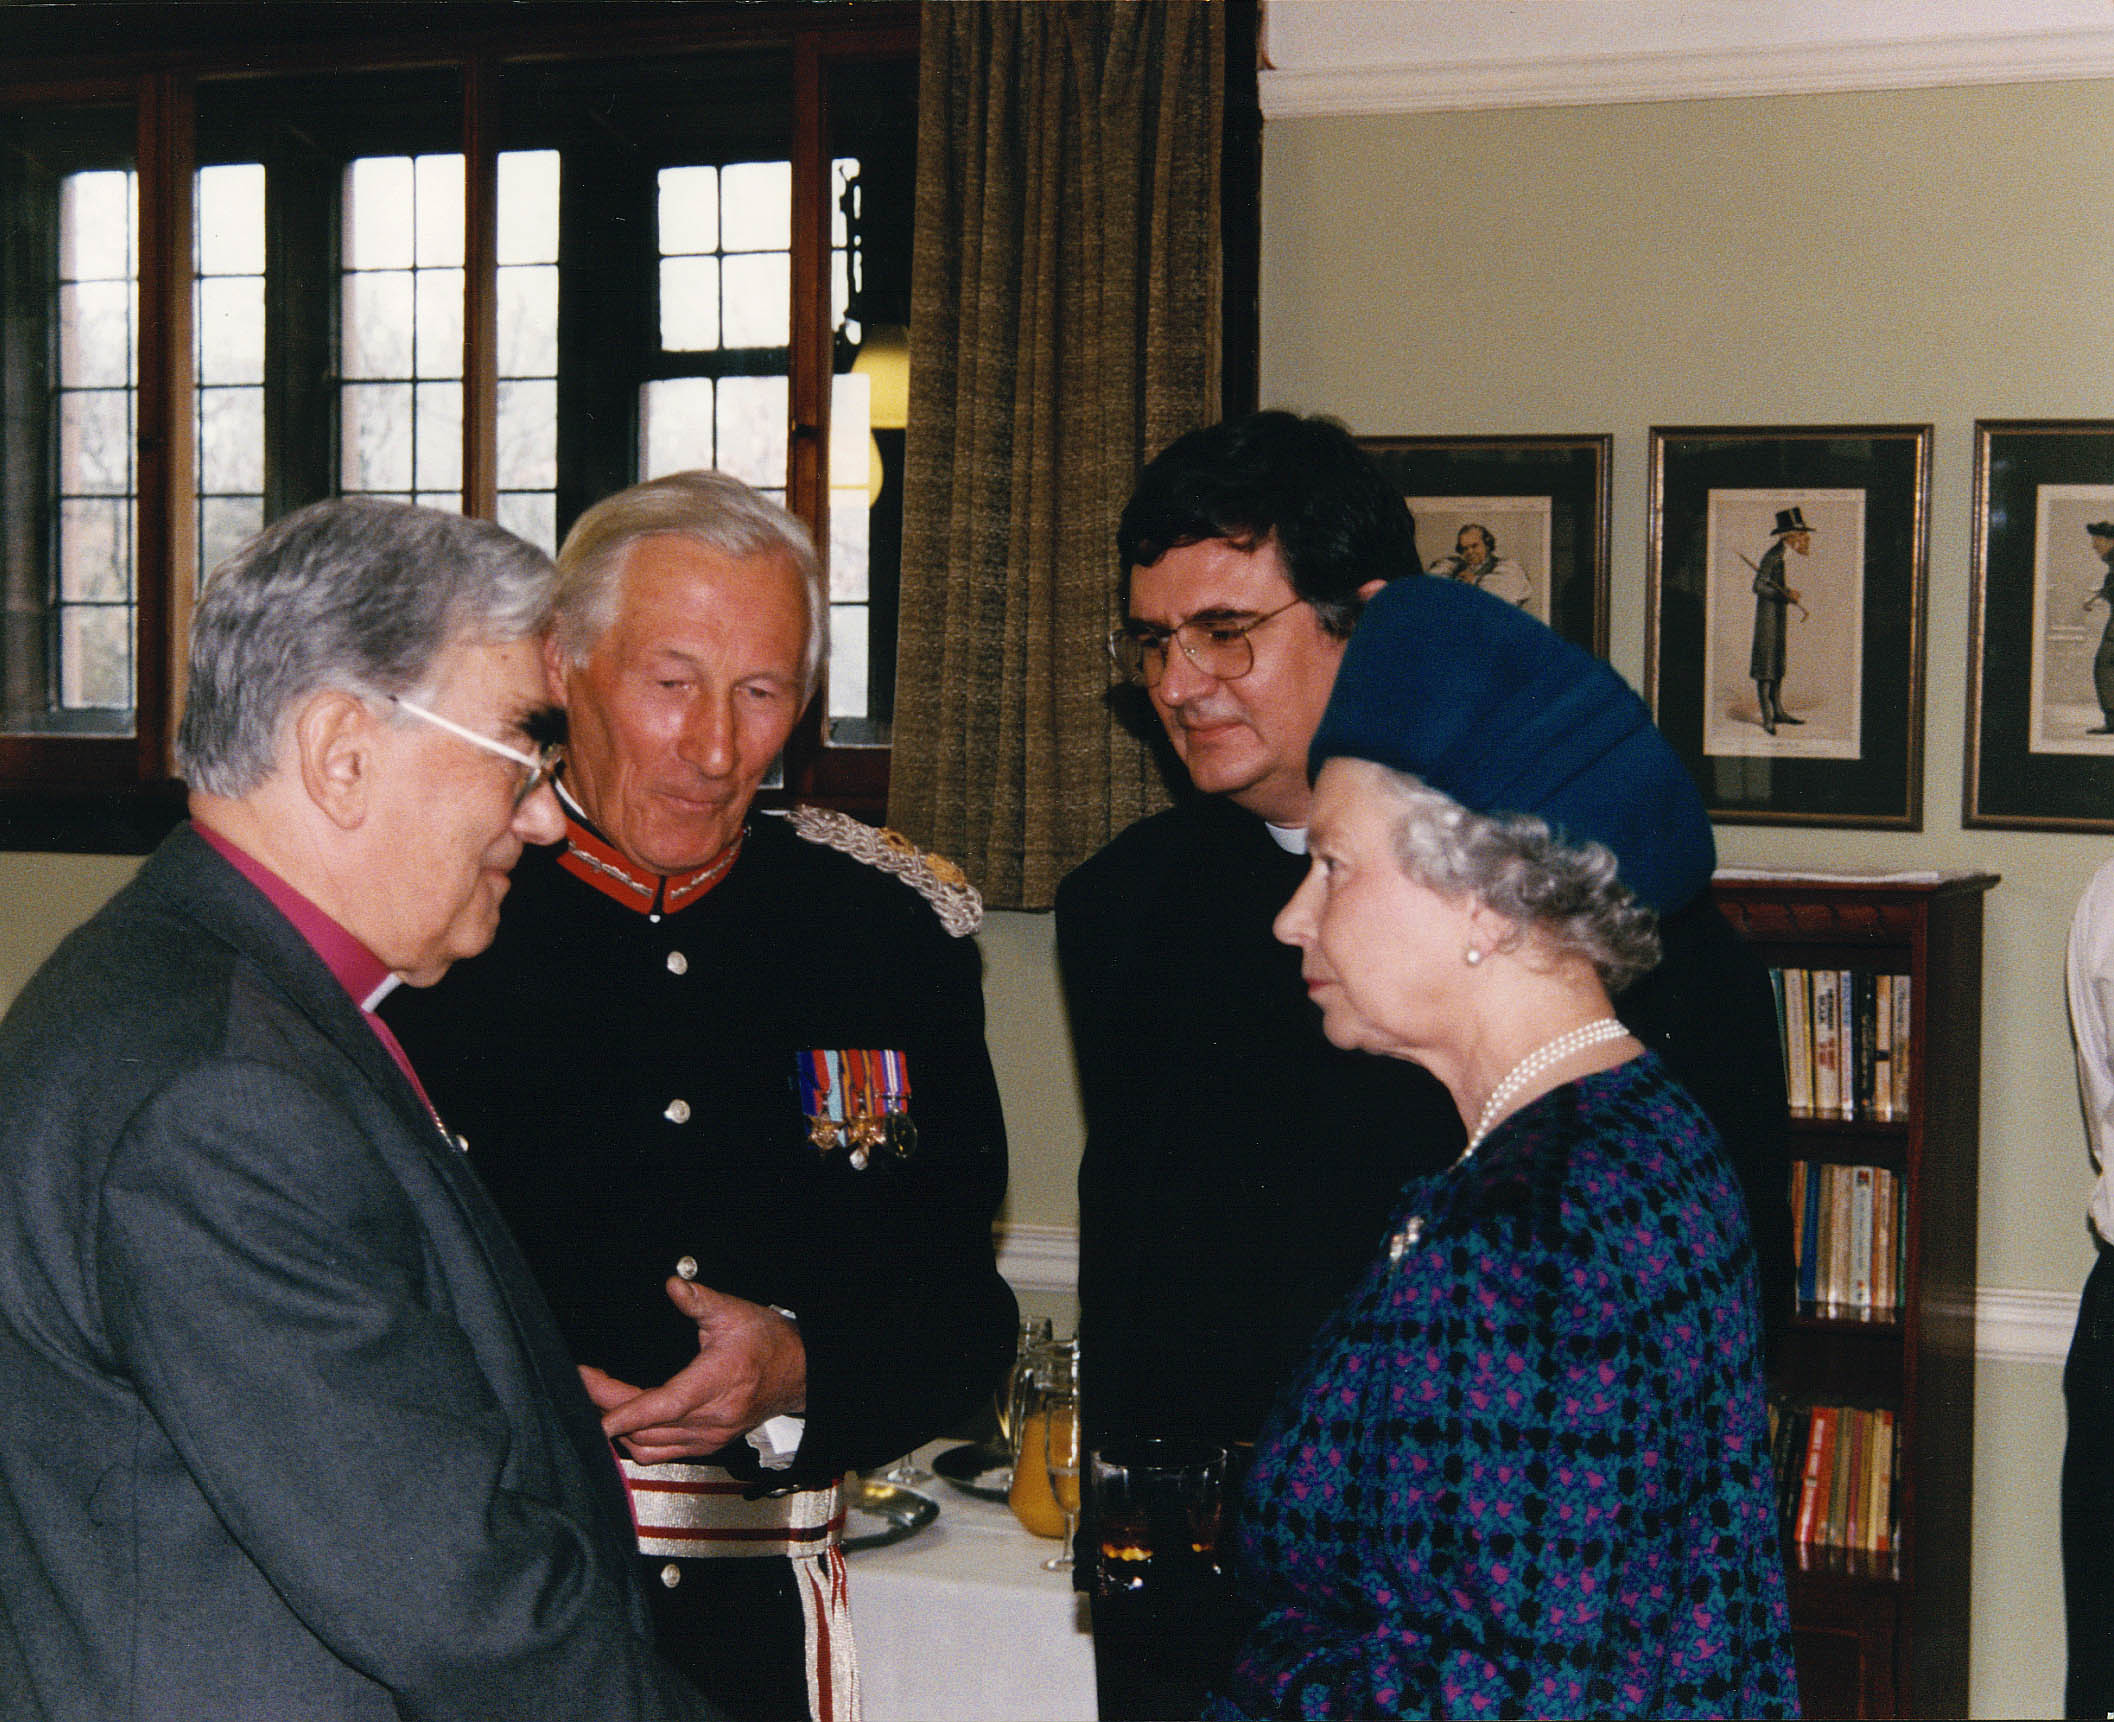 The Most Revd Alwyn Rice Jones, Archbishop of Wales, Peter Francis and Queen Elizabeth II in the Gladstone Room.